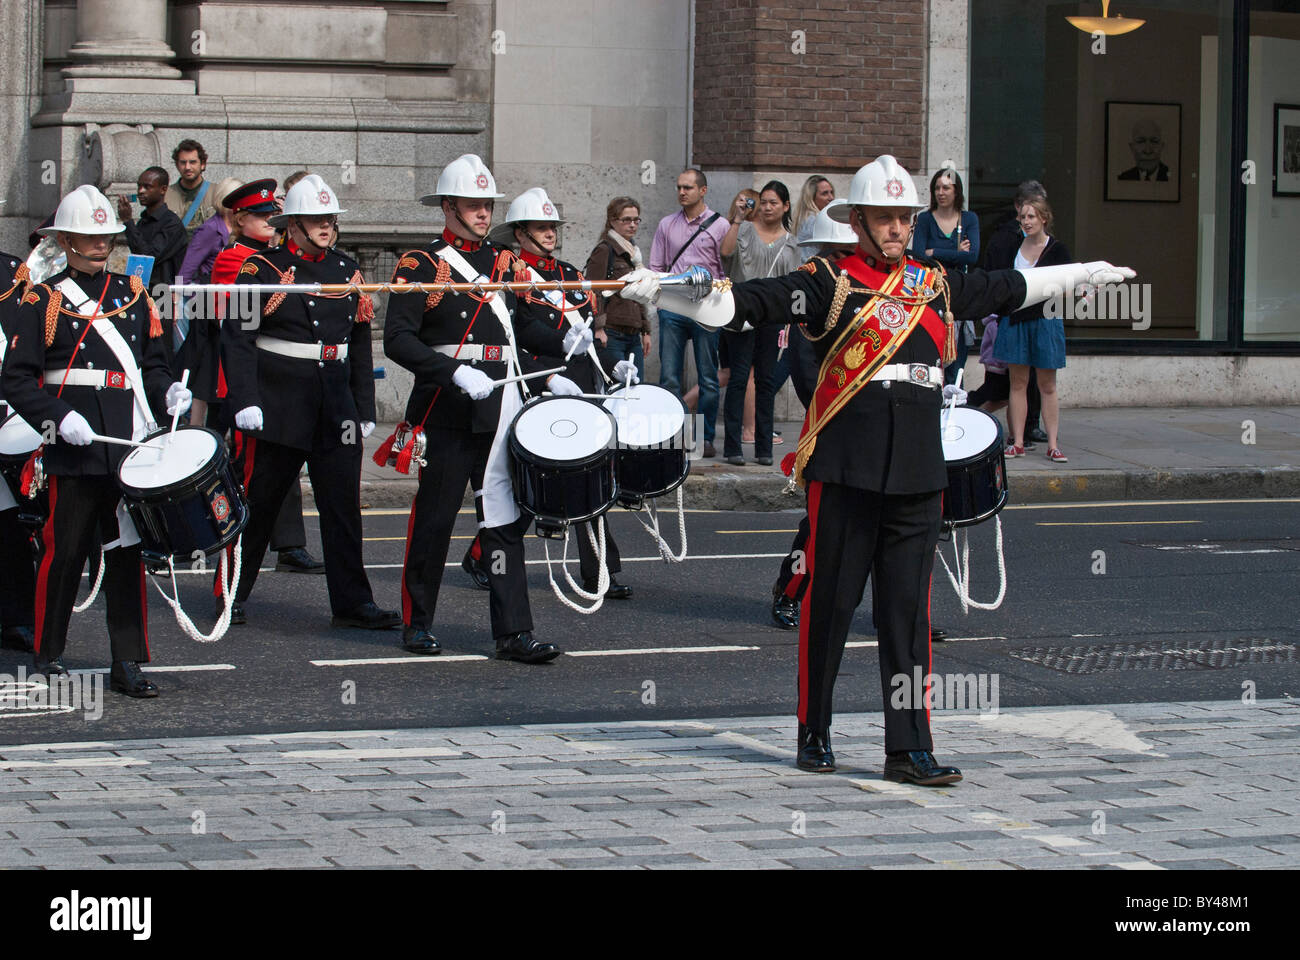 March master leads Fire brigade band National firefighters memorial Service of remembrance crossing Newgate Street EC1 London . Stock Photo